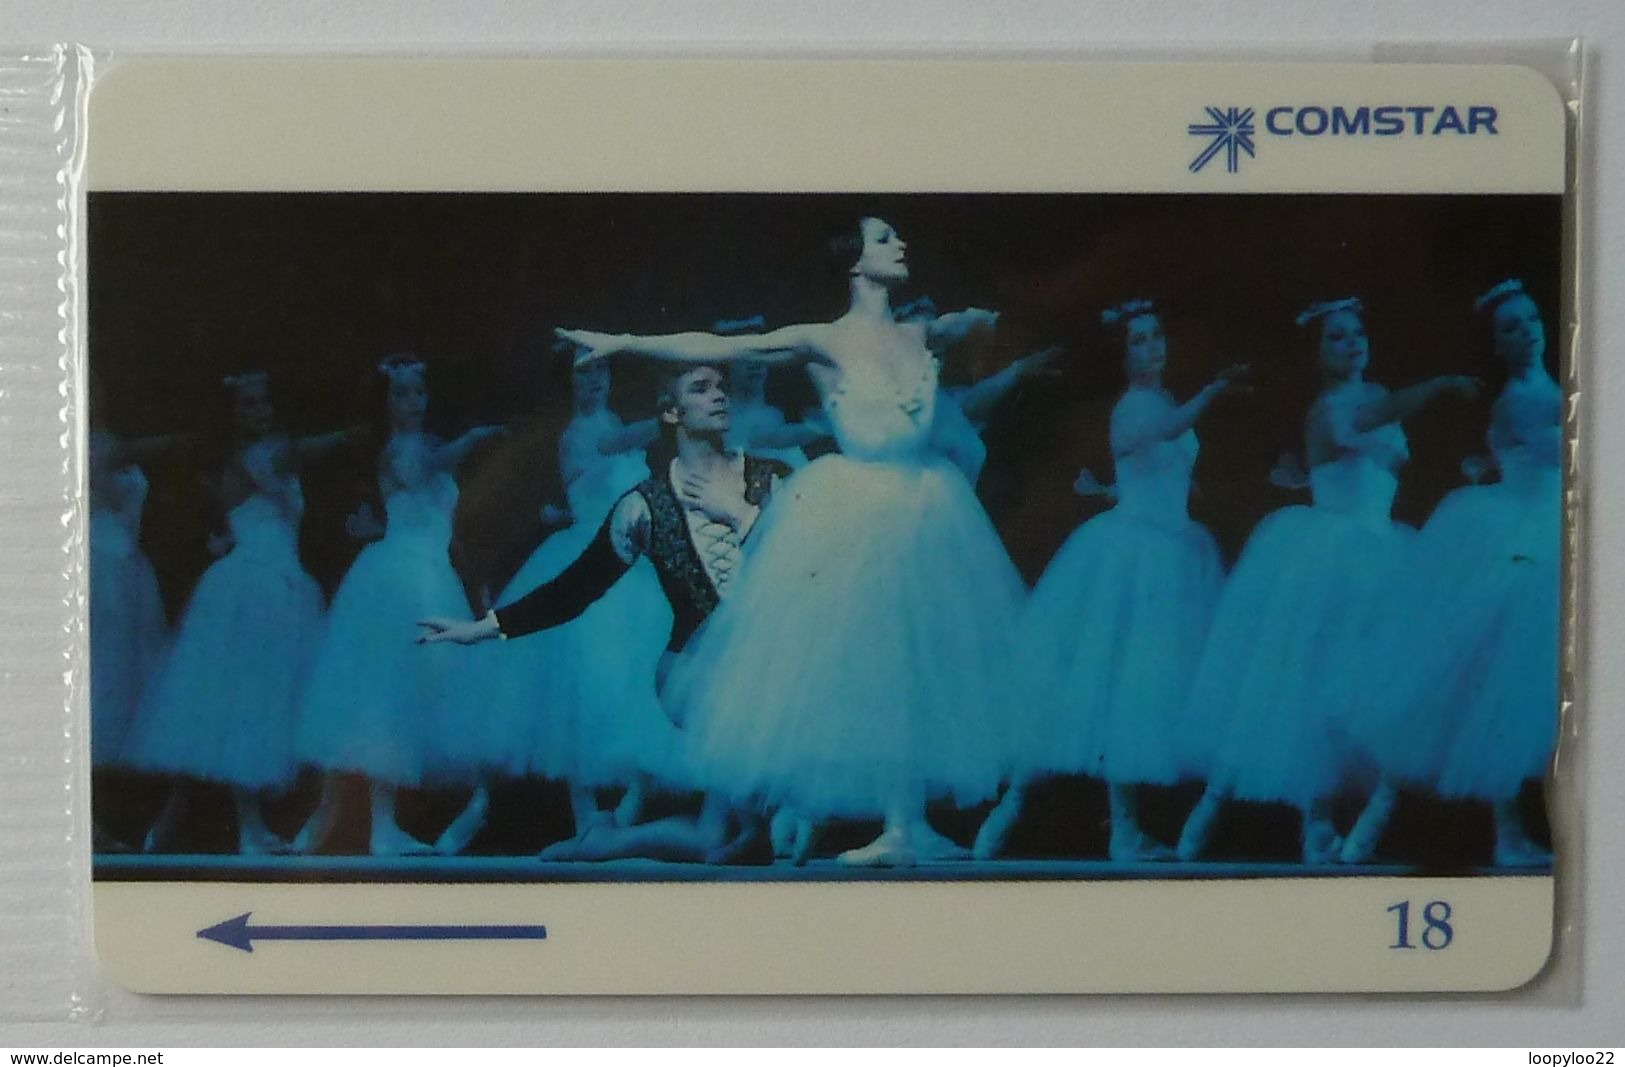 RUSSIA / USSR - GPT - Moscow - Comstar - Bolshoi Ballet 3  - Giselle - $18 - 8SSRH - Mint Blister - Russie